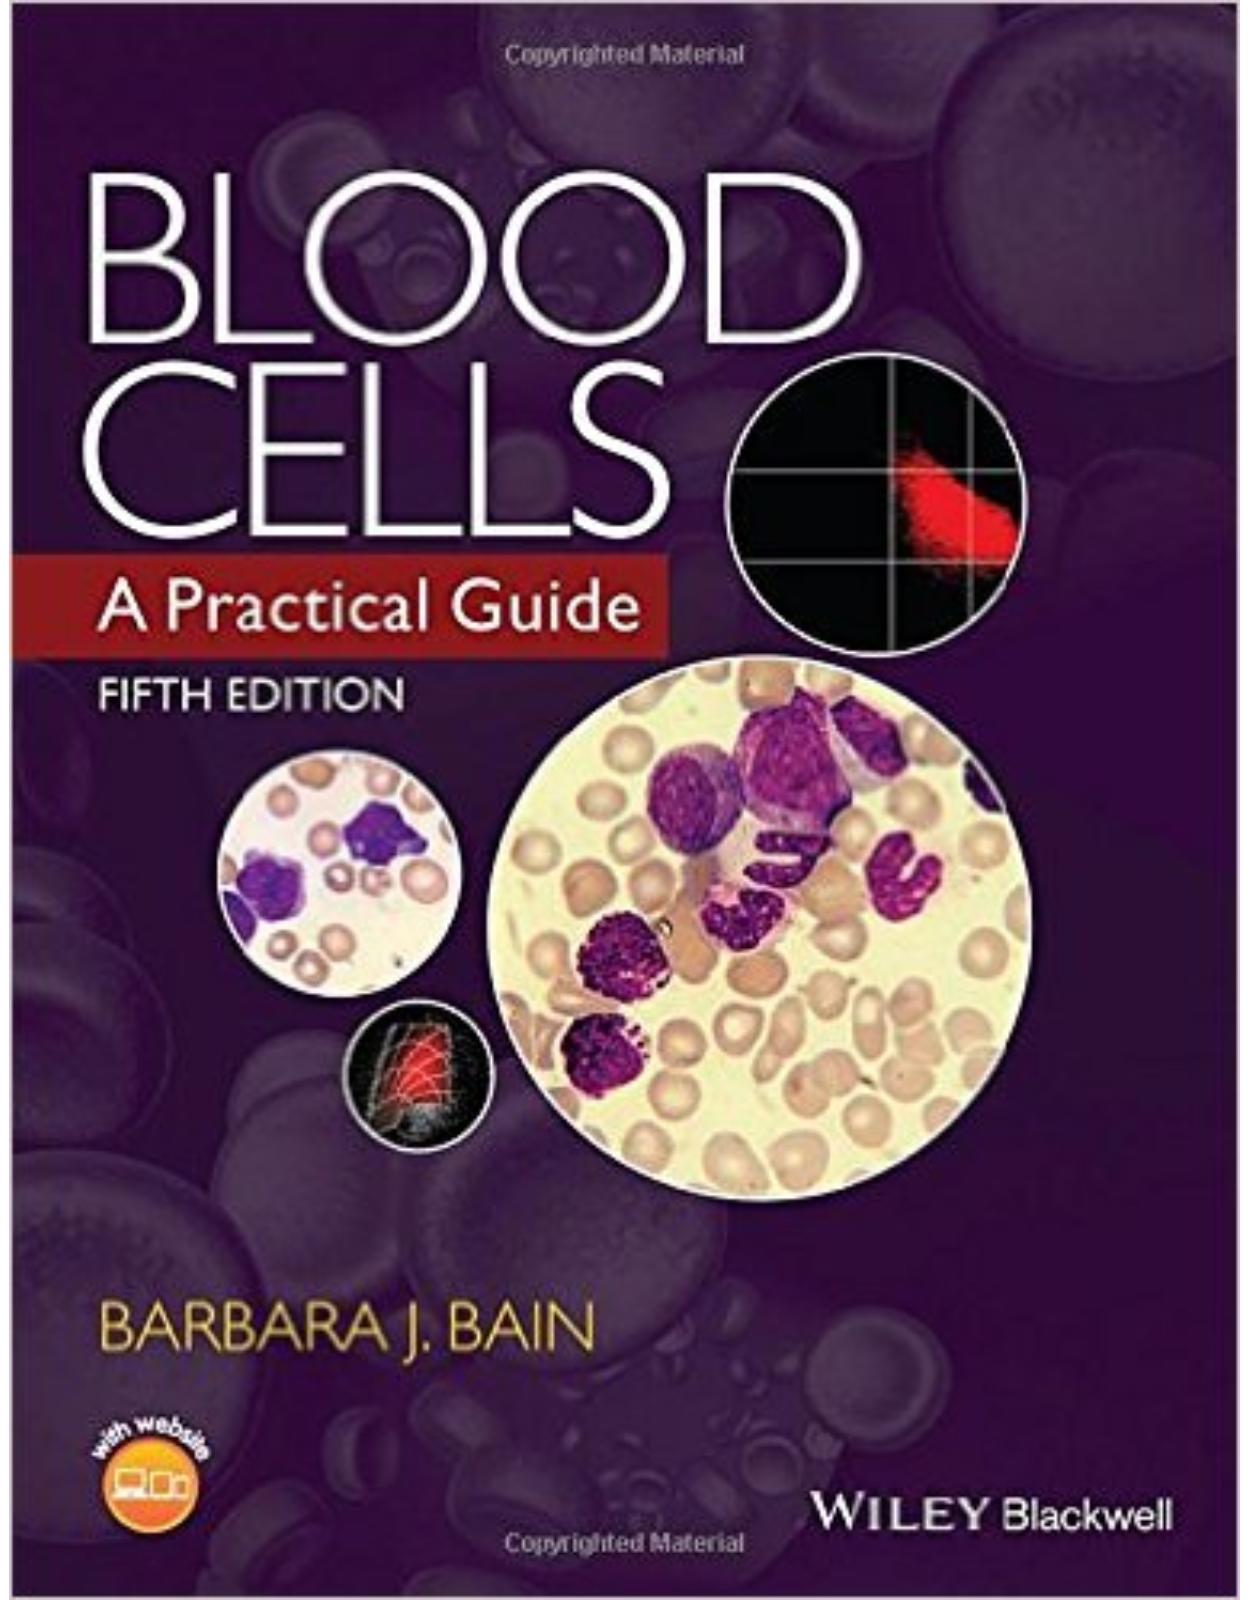 Blood Cells: A Practical Guide, 5th Edition